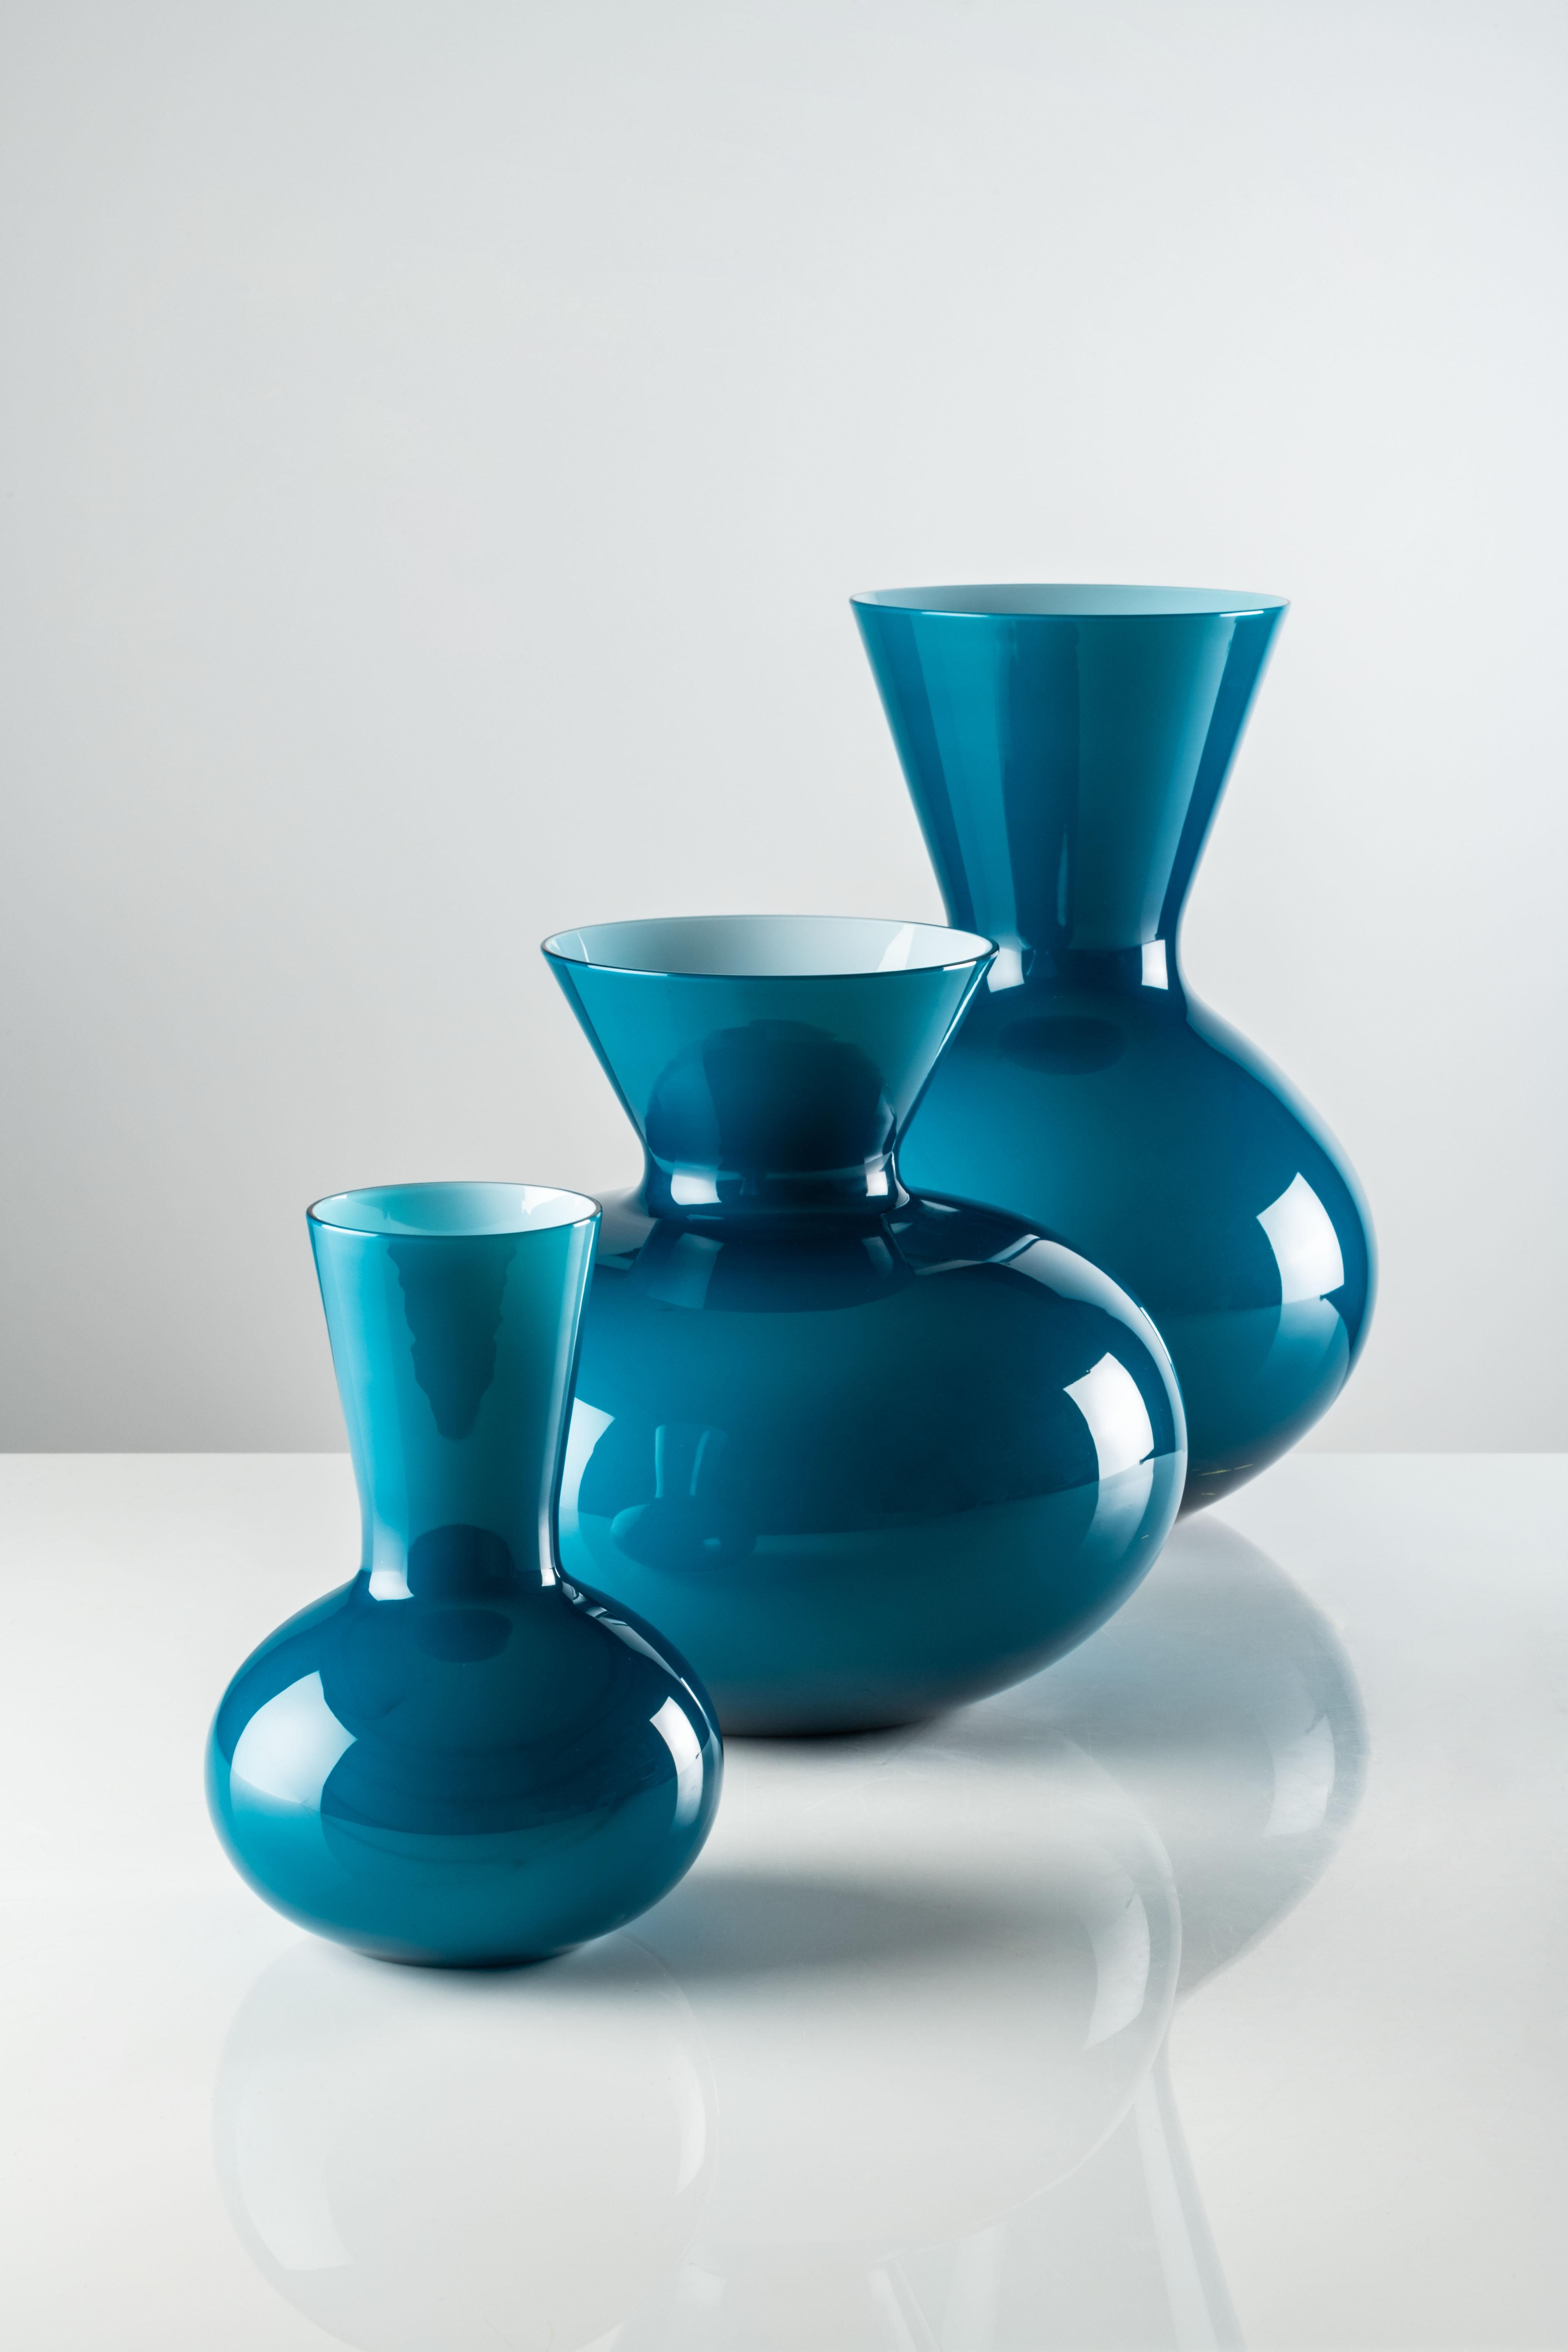 Idria small vase in horizon Murano glass by Venini. The Ancient Greek water vessel sheds its skin, as terracotta gives way to glass, thanks to Venini. Its design speaks of bygone days and rhythms, bringing them back to life: timeless beauty that